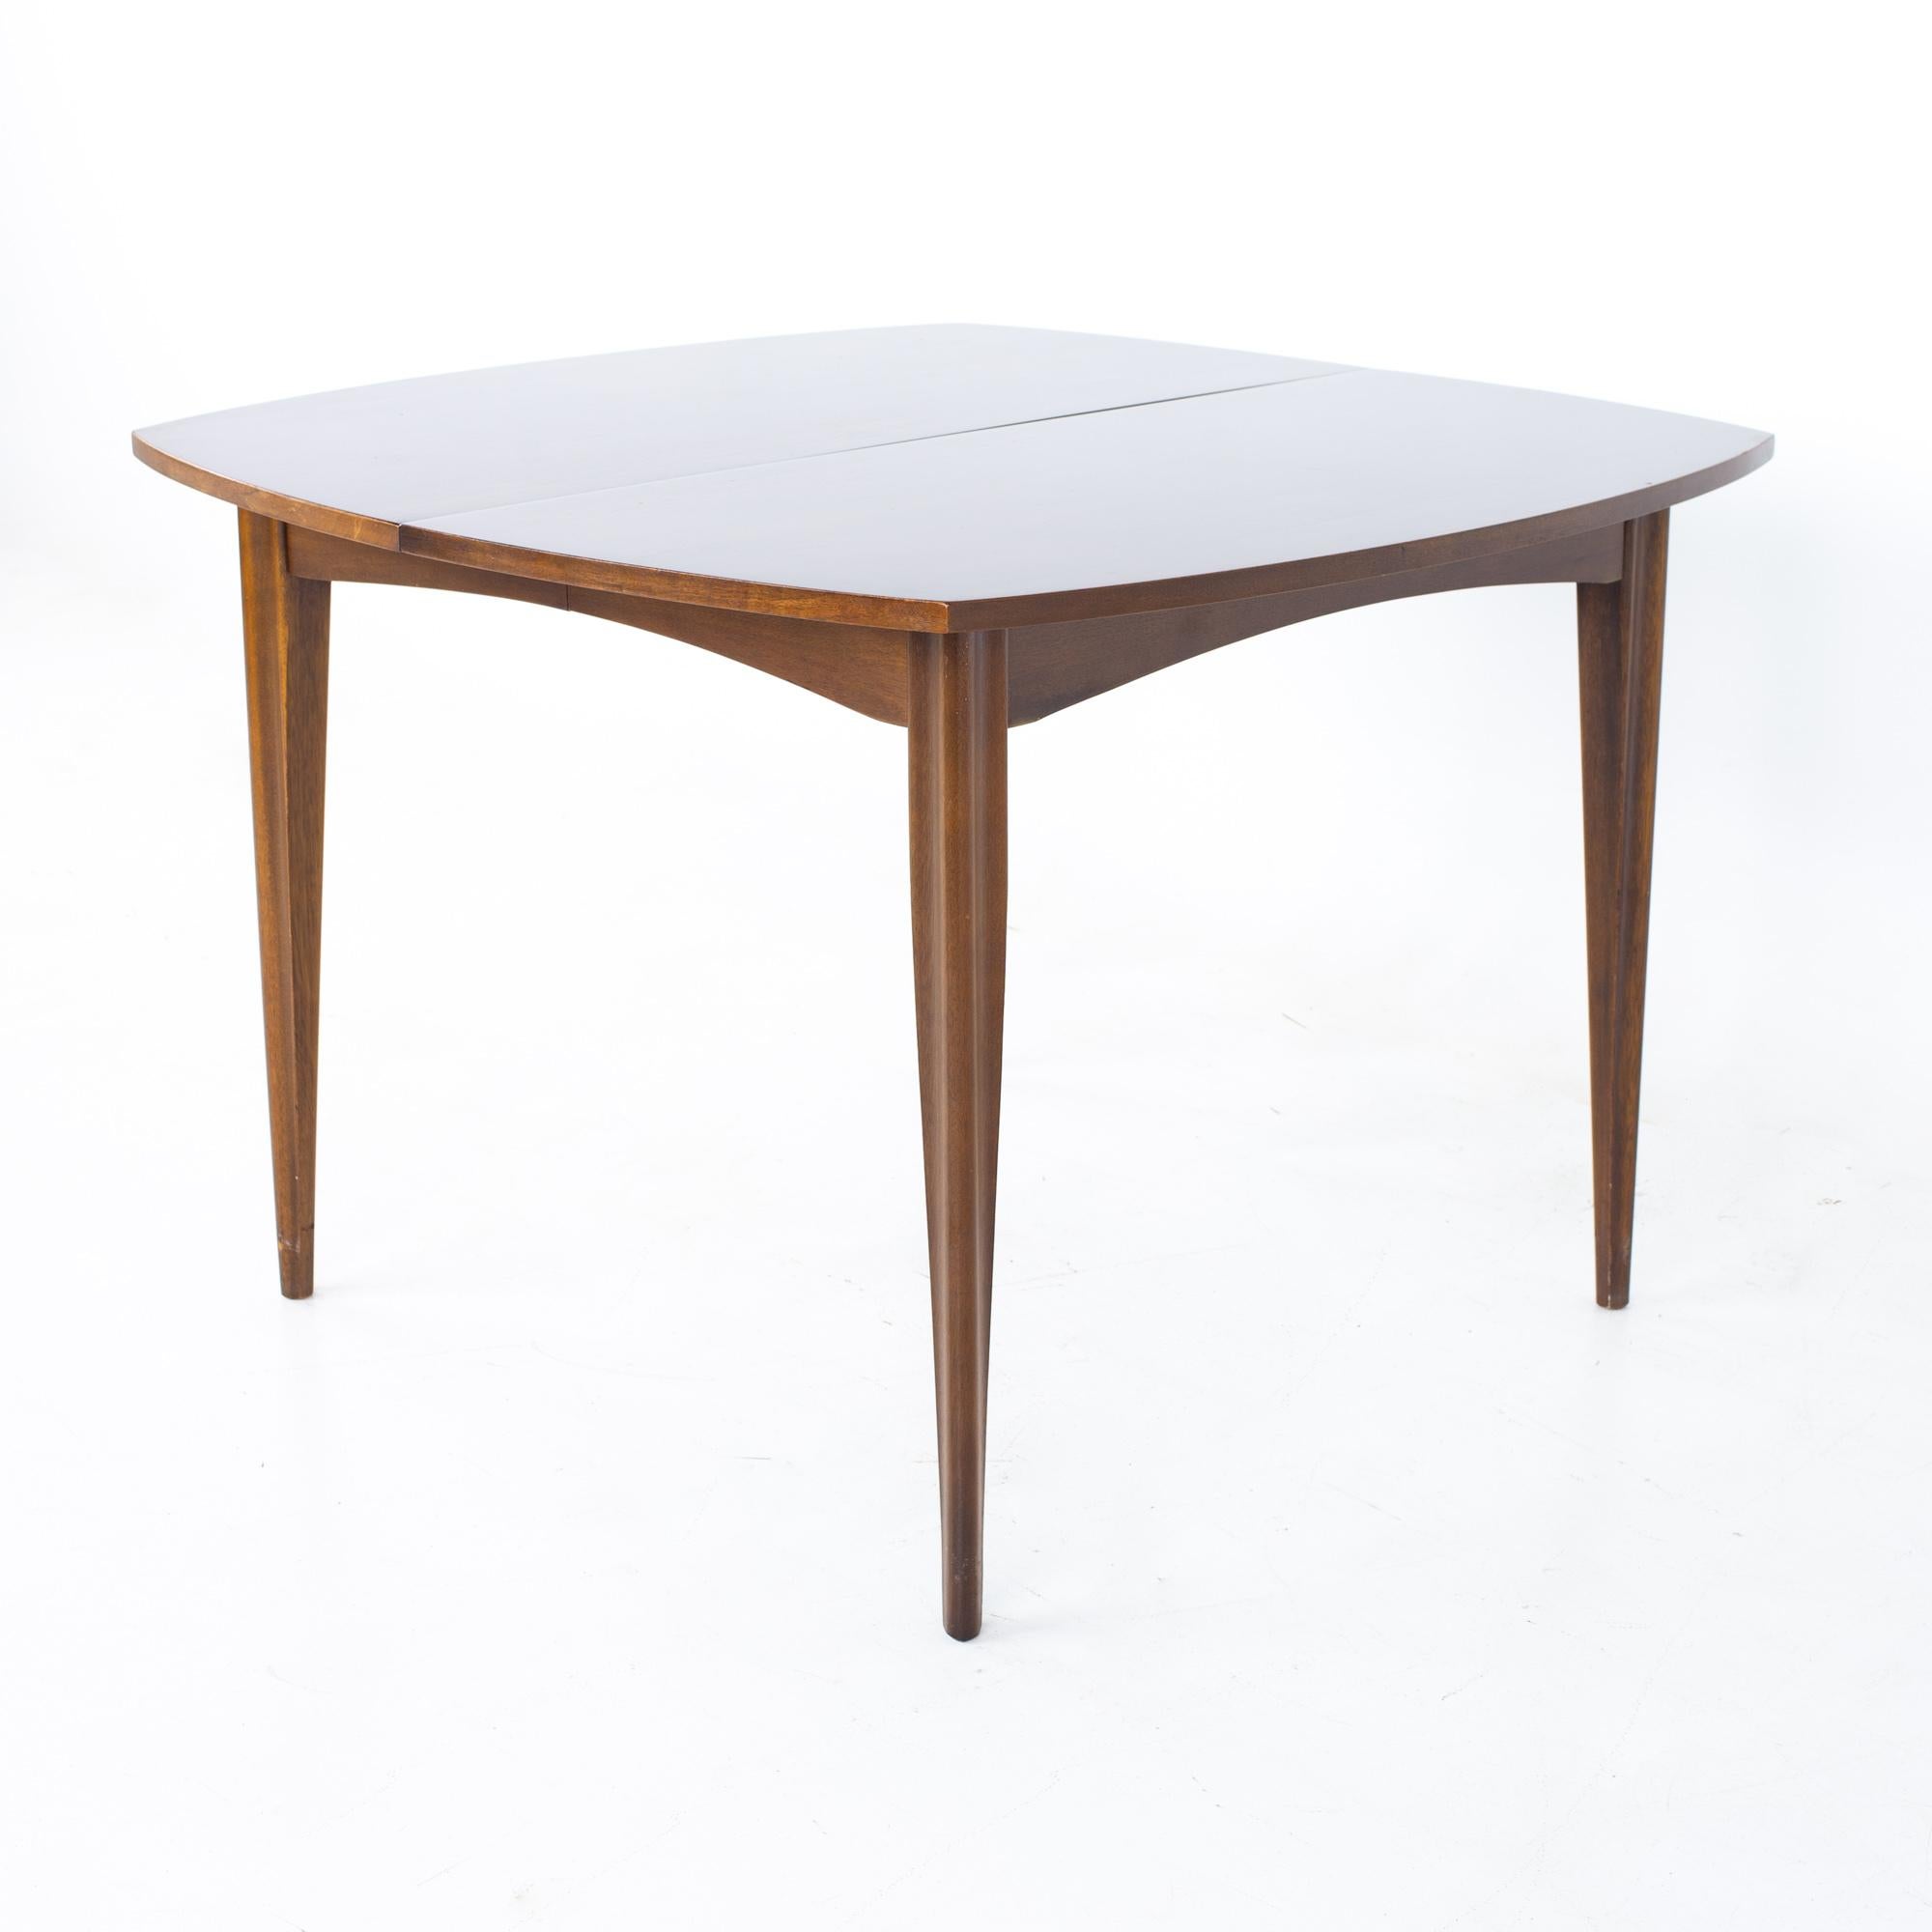 Broyhill emphasis mid century walnut surfboard expanding dining table
Table measures: 42 wide x 42 deep x 29.5 inches high; each leaf is 18 inches wide, making a maximum table width of 78 inches when both leaves are used, and a chair clearance of